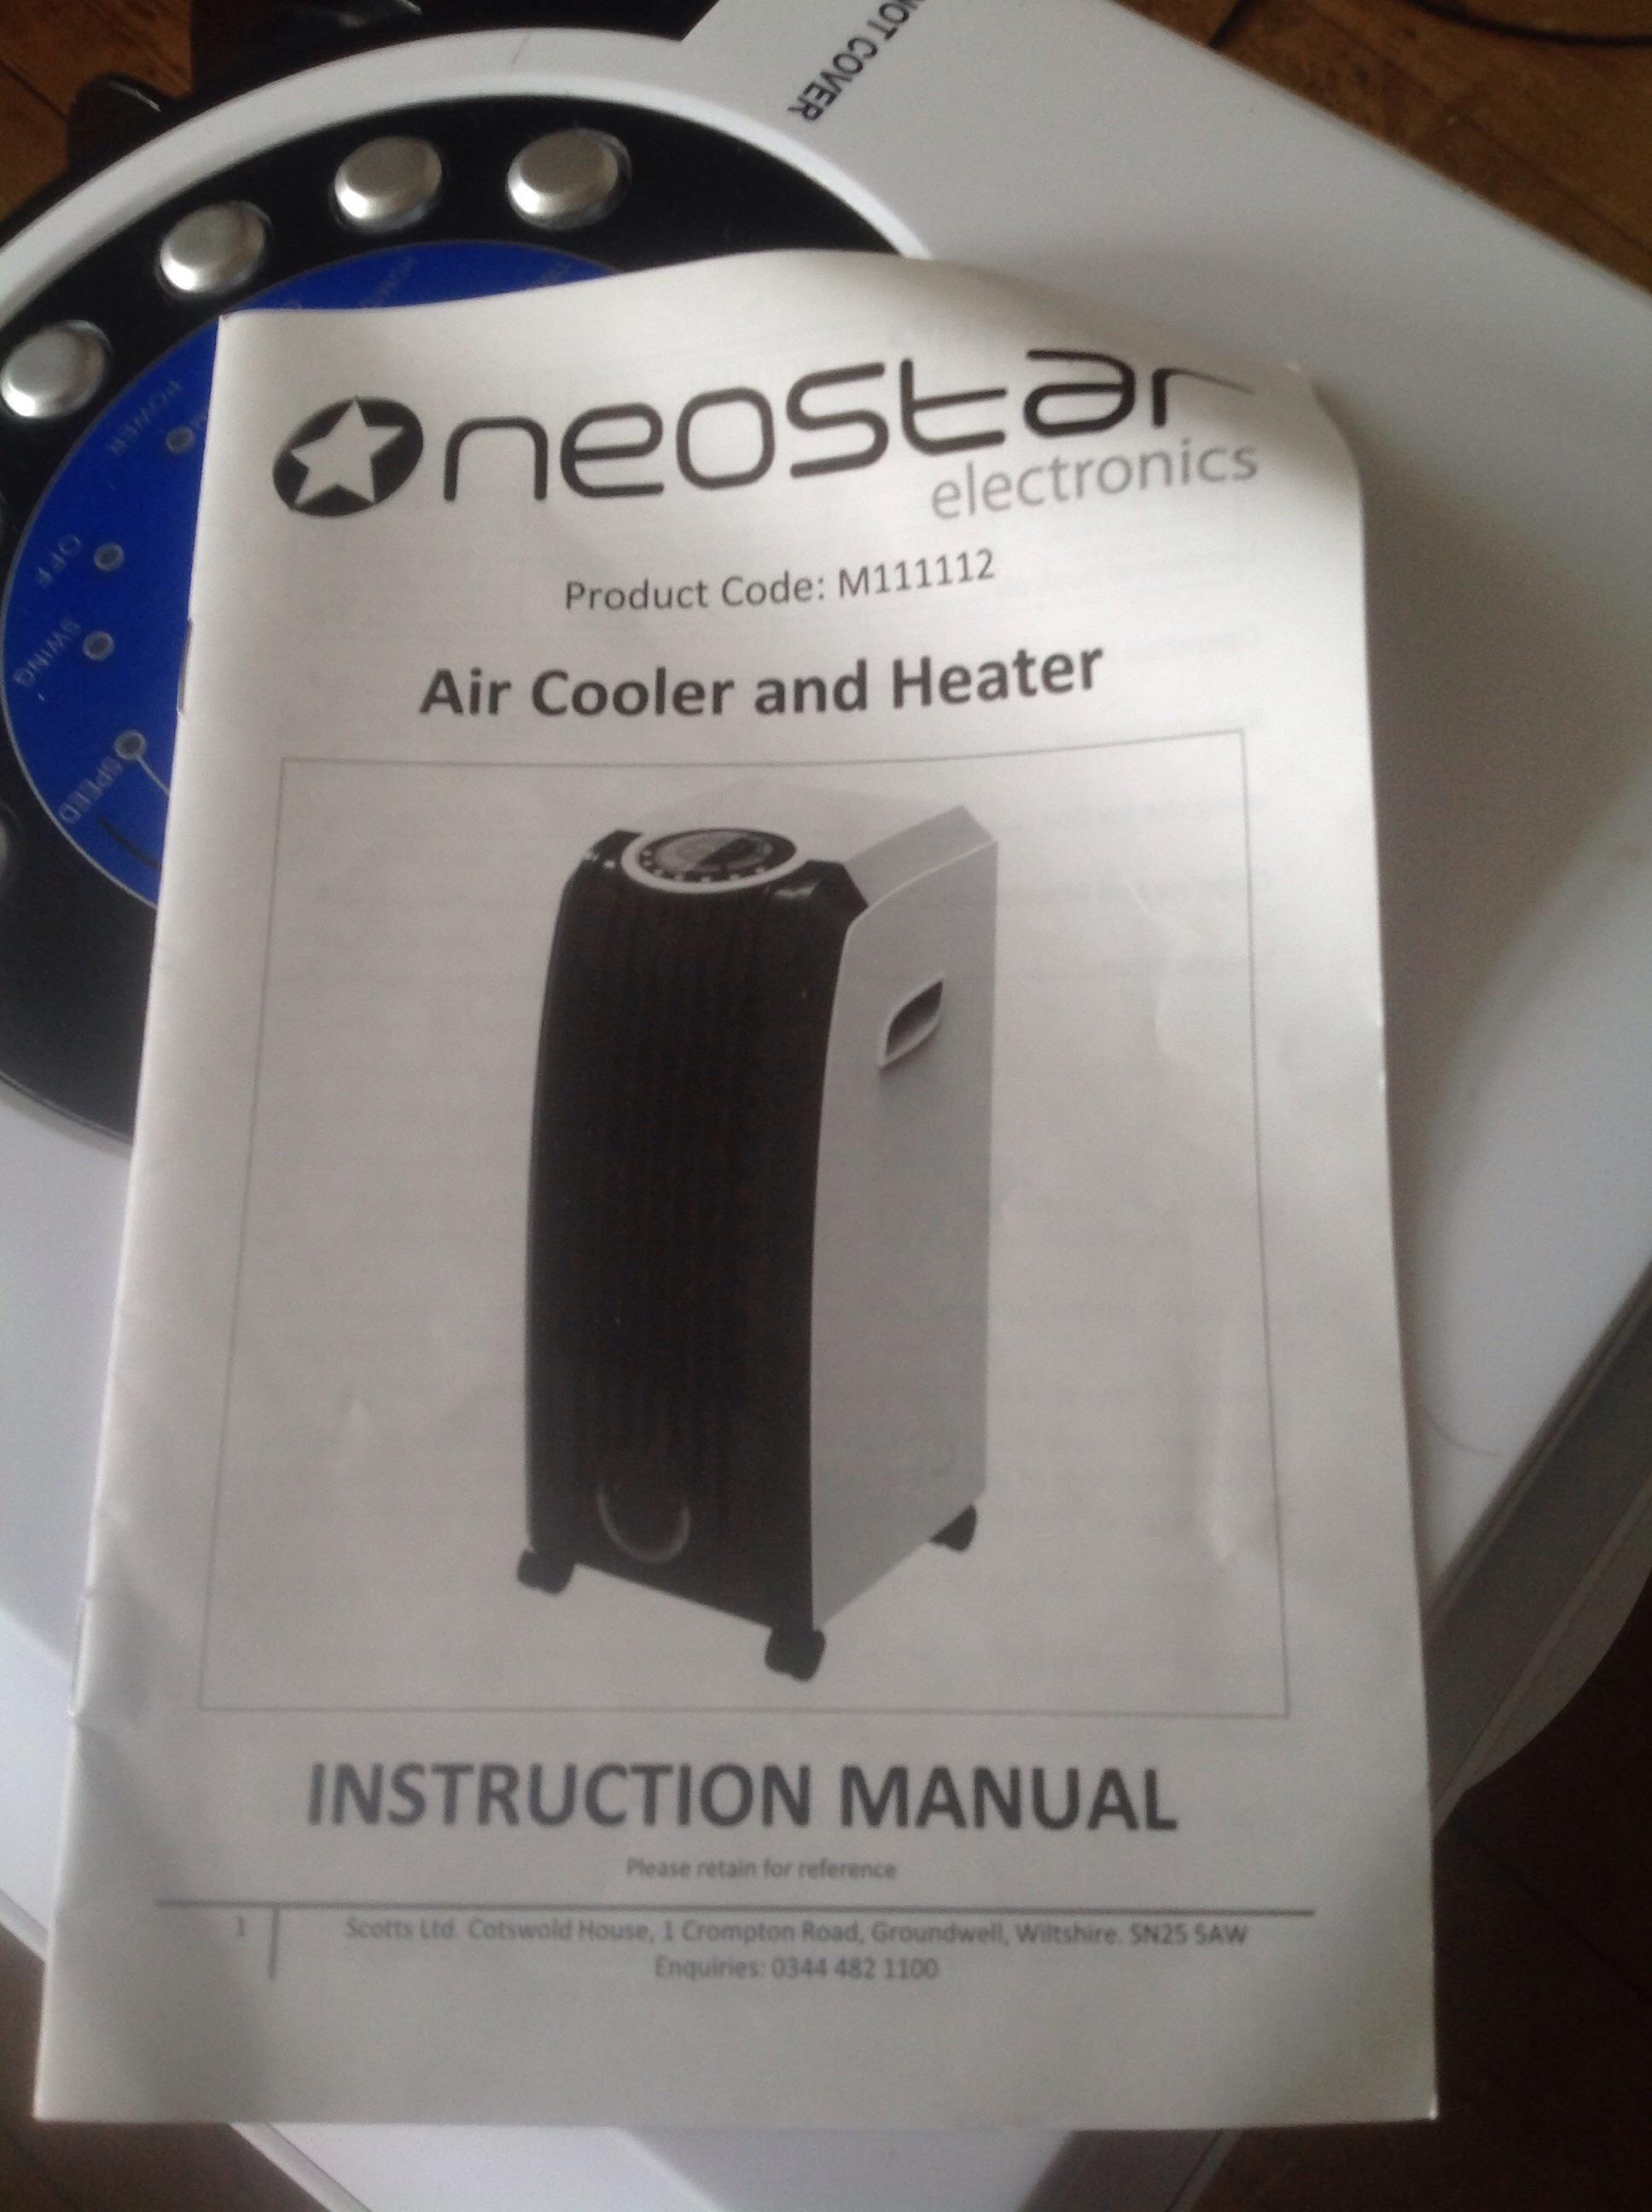 neostar air cooler and heater